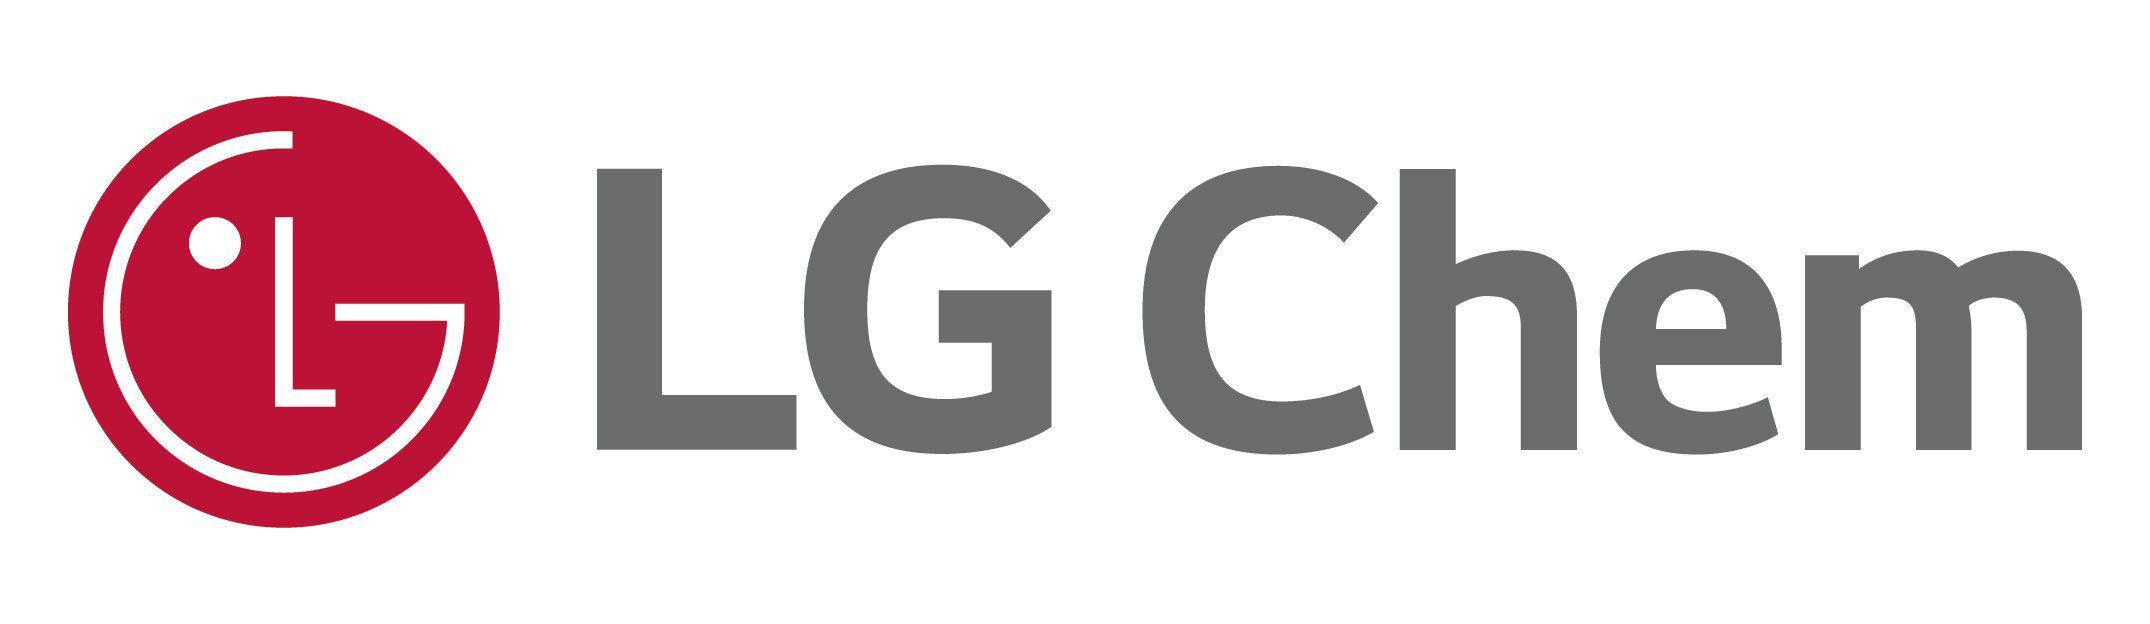 Small LG Logo - LG Chem Marches into the Brackish Water RO Market After Establishing